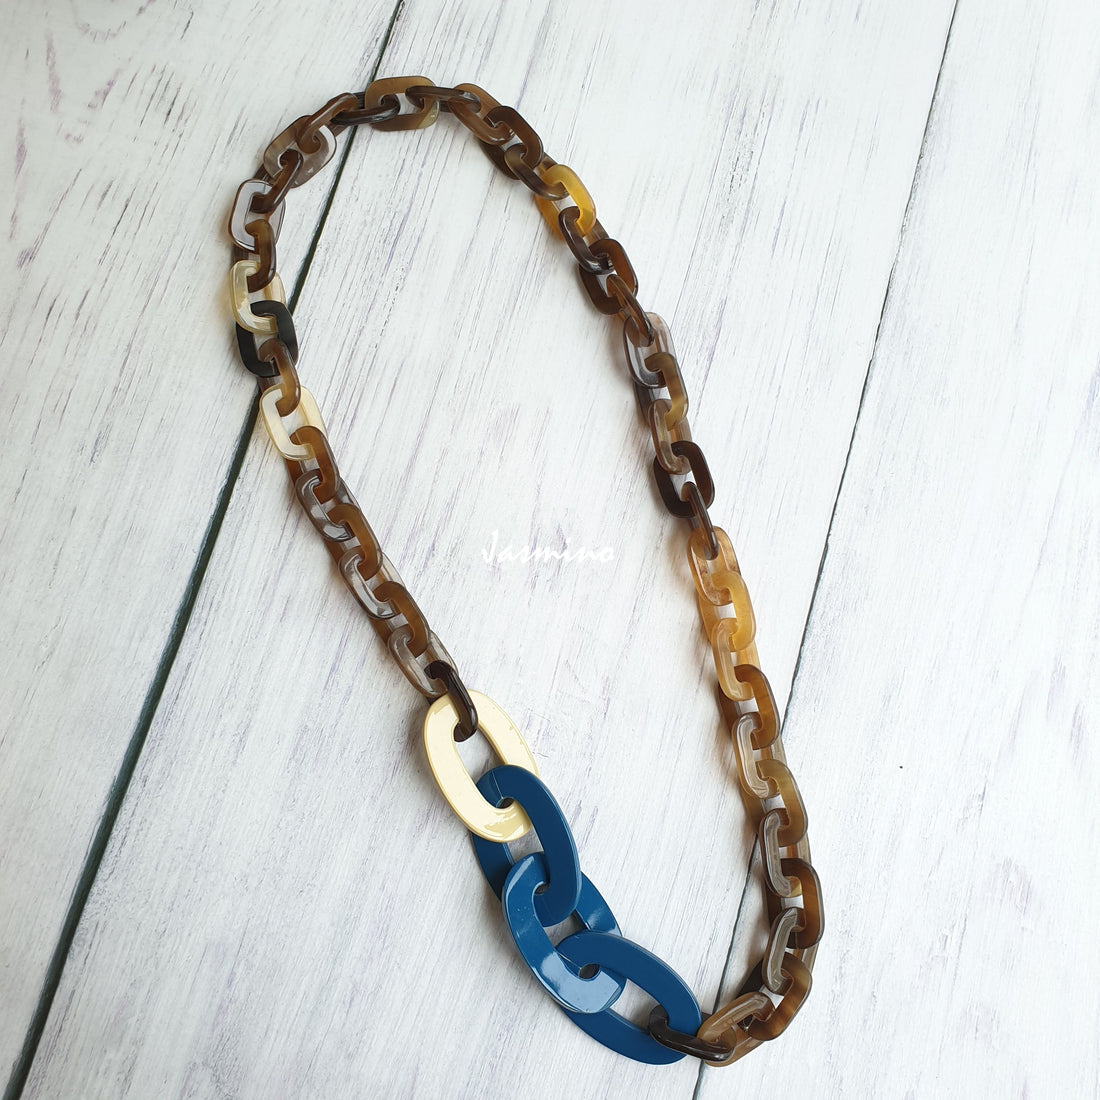 Jasmino unique handmade Vintage chain necklace features blue and brown in natural buffalo horn for women